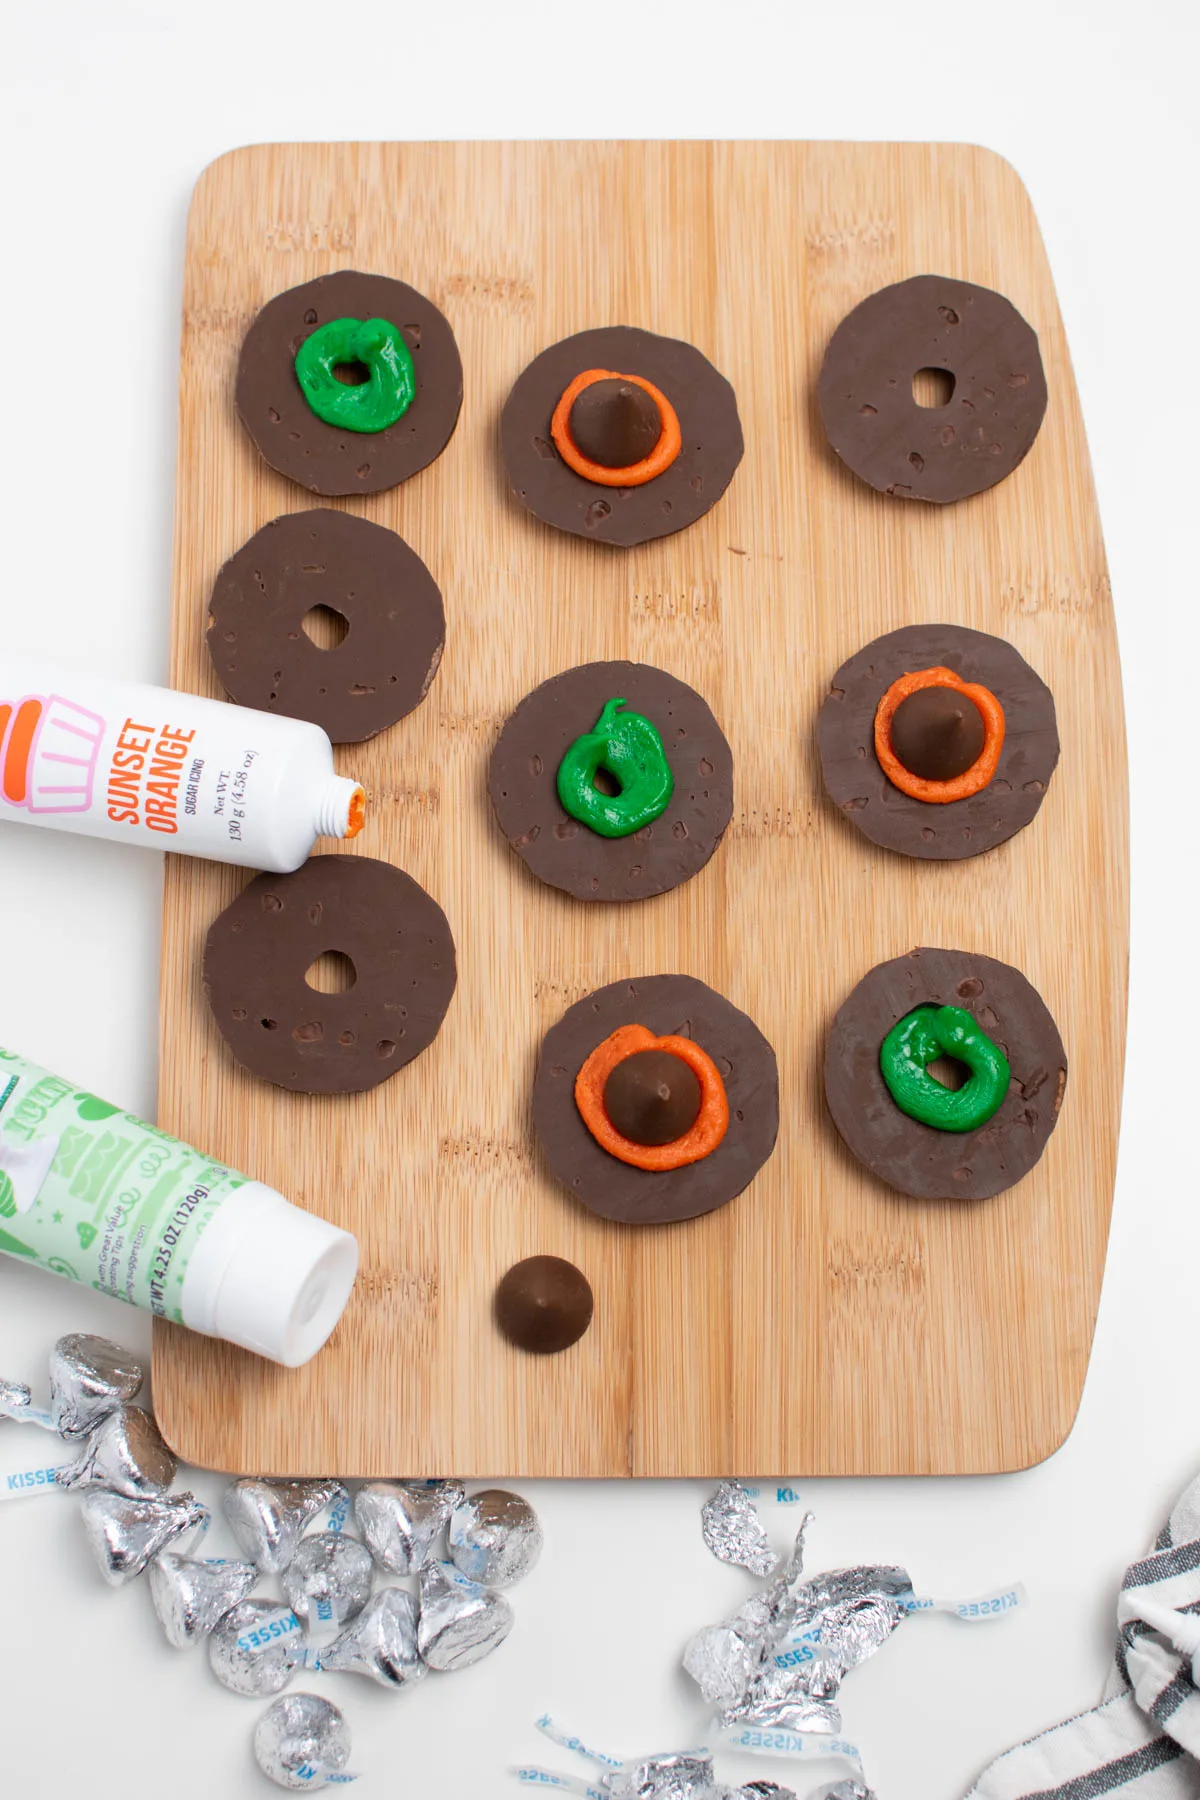 Various circles of orange and green colored frosting on fudge stripes cookies.